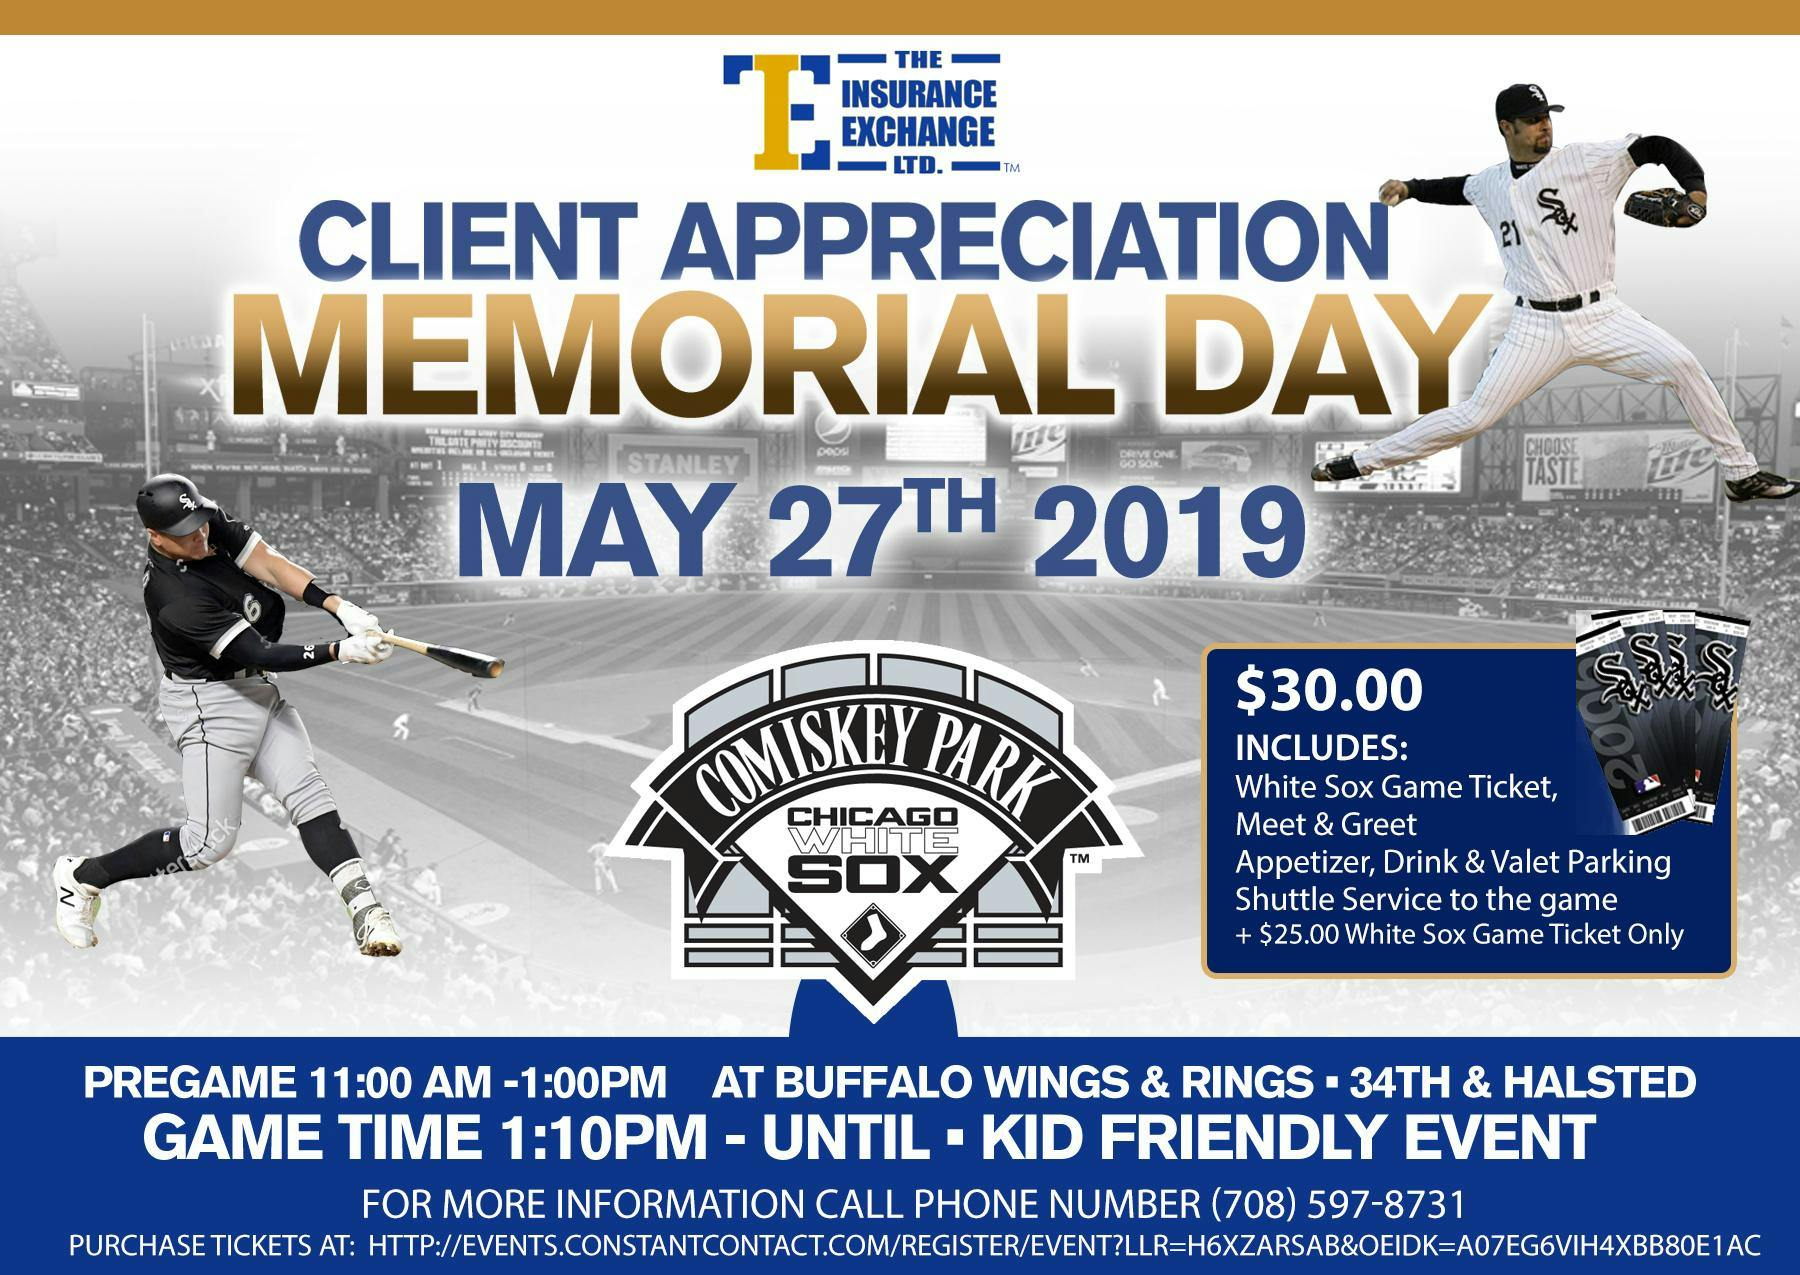 THE INSURANCE EXCHANGE'S 6TH ANNUAL WHITE SOX CLIENT APPRECIATION EVENT